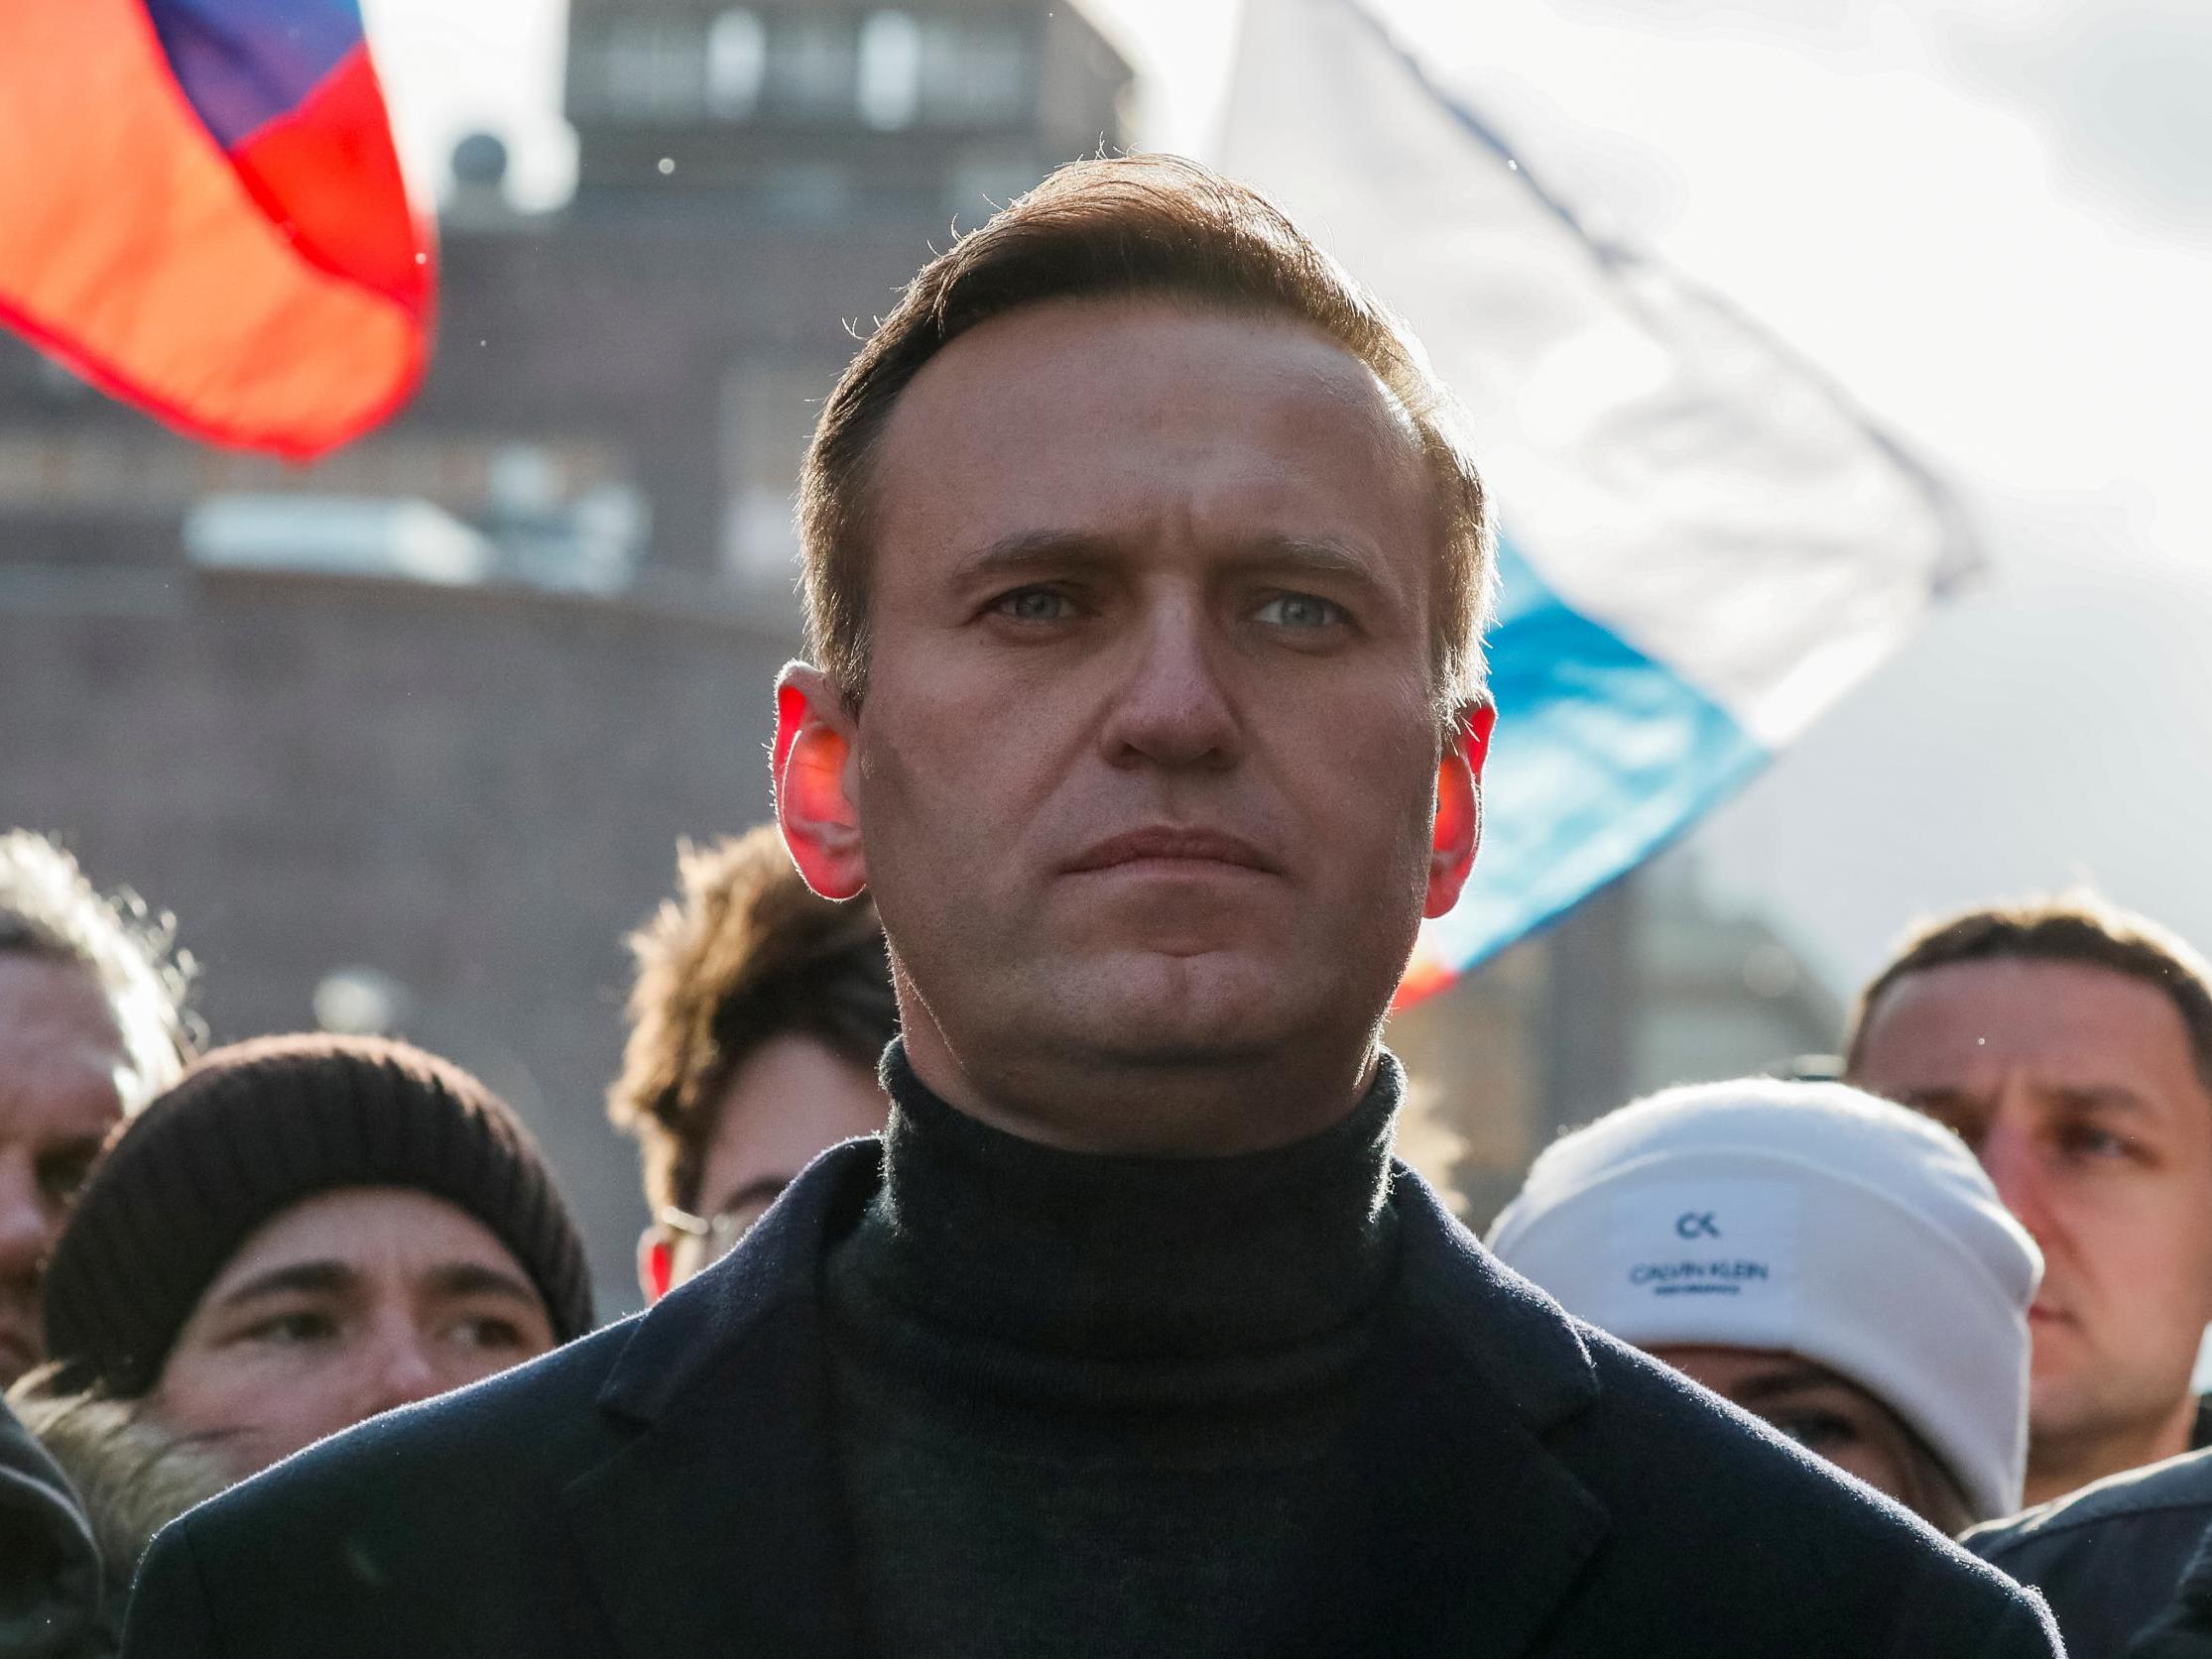 Alexei Navalny showed signs of poisoning when he fell ill on a flight last month, and is now in a coma